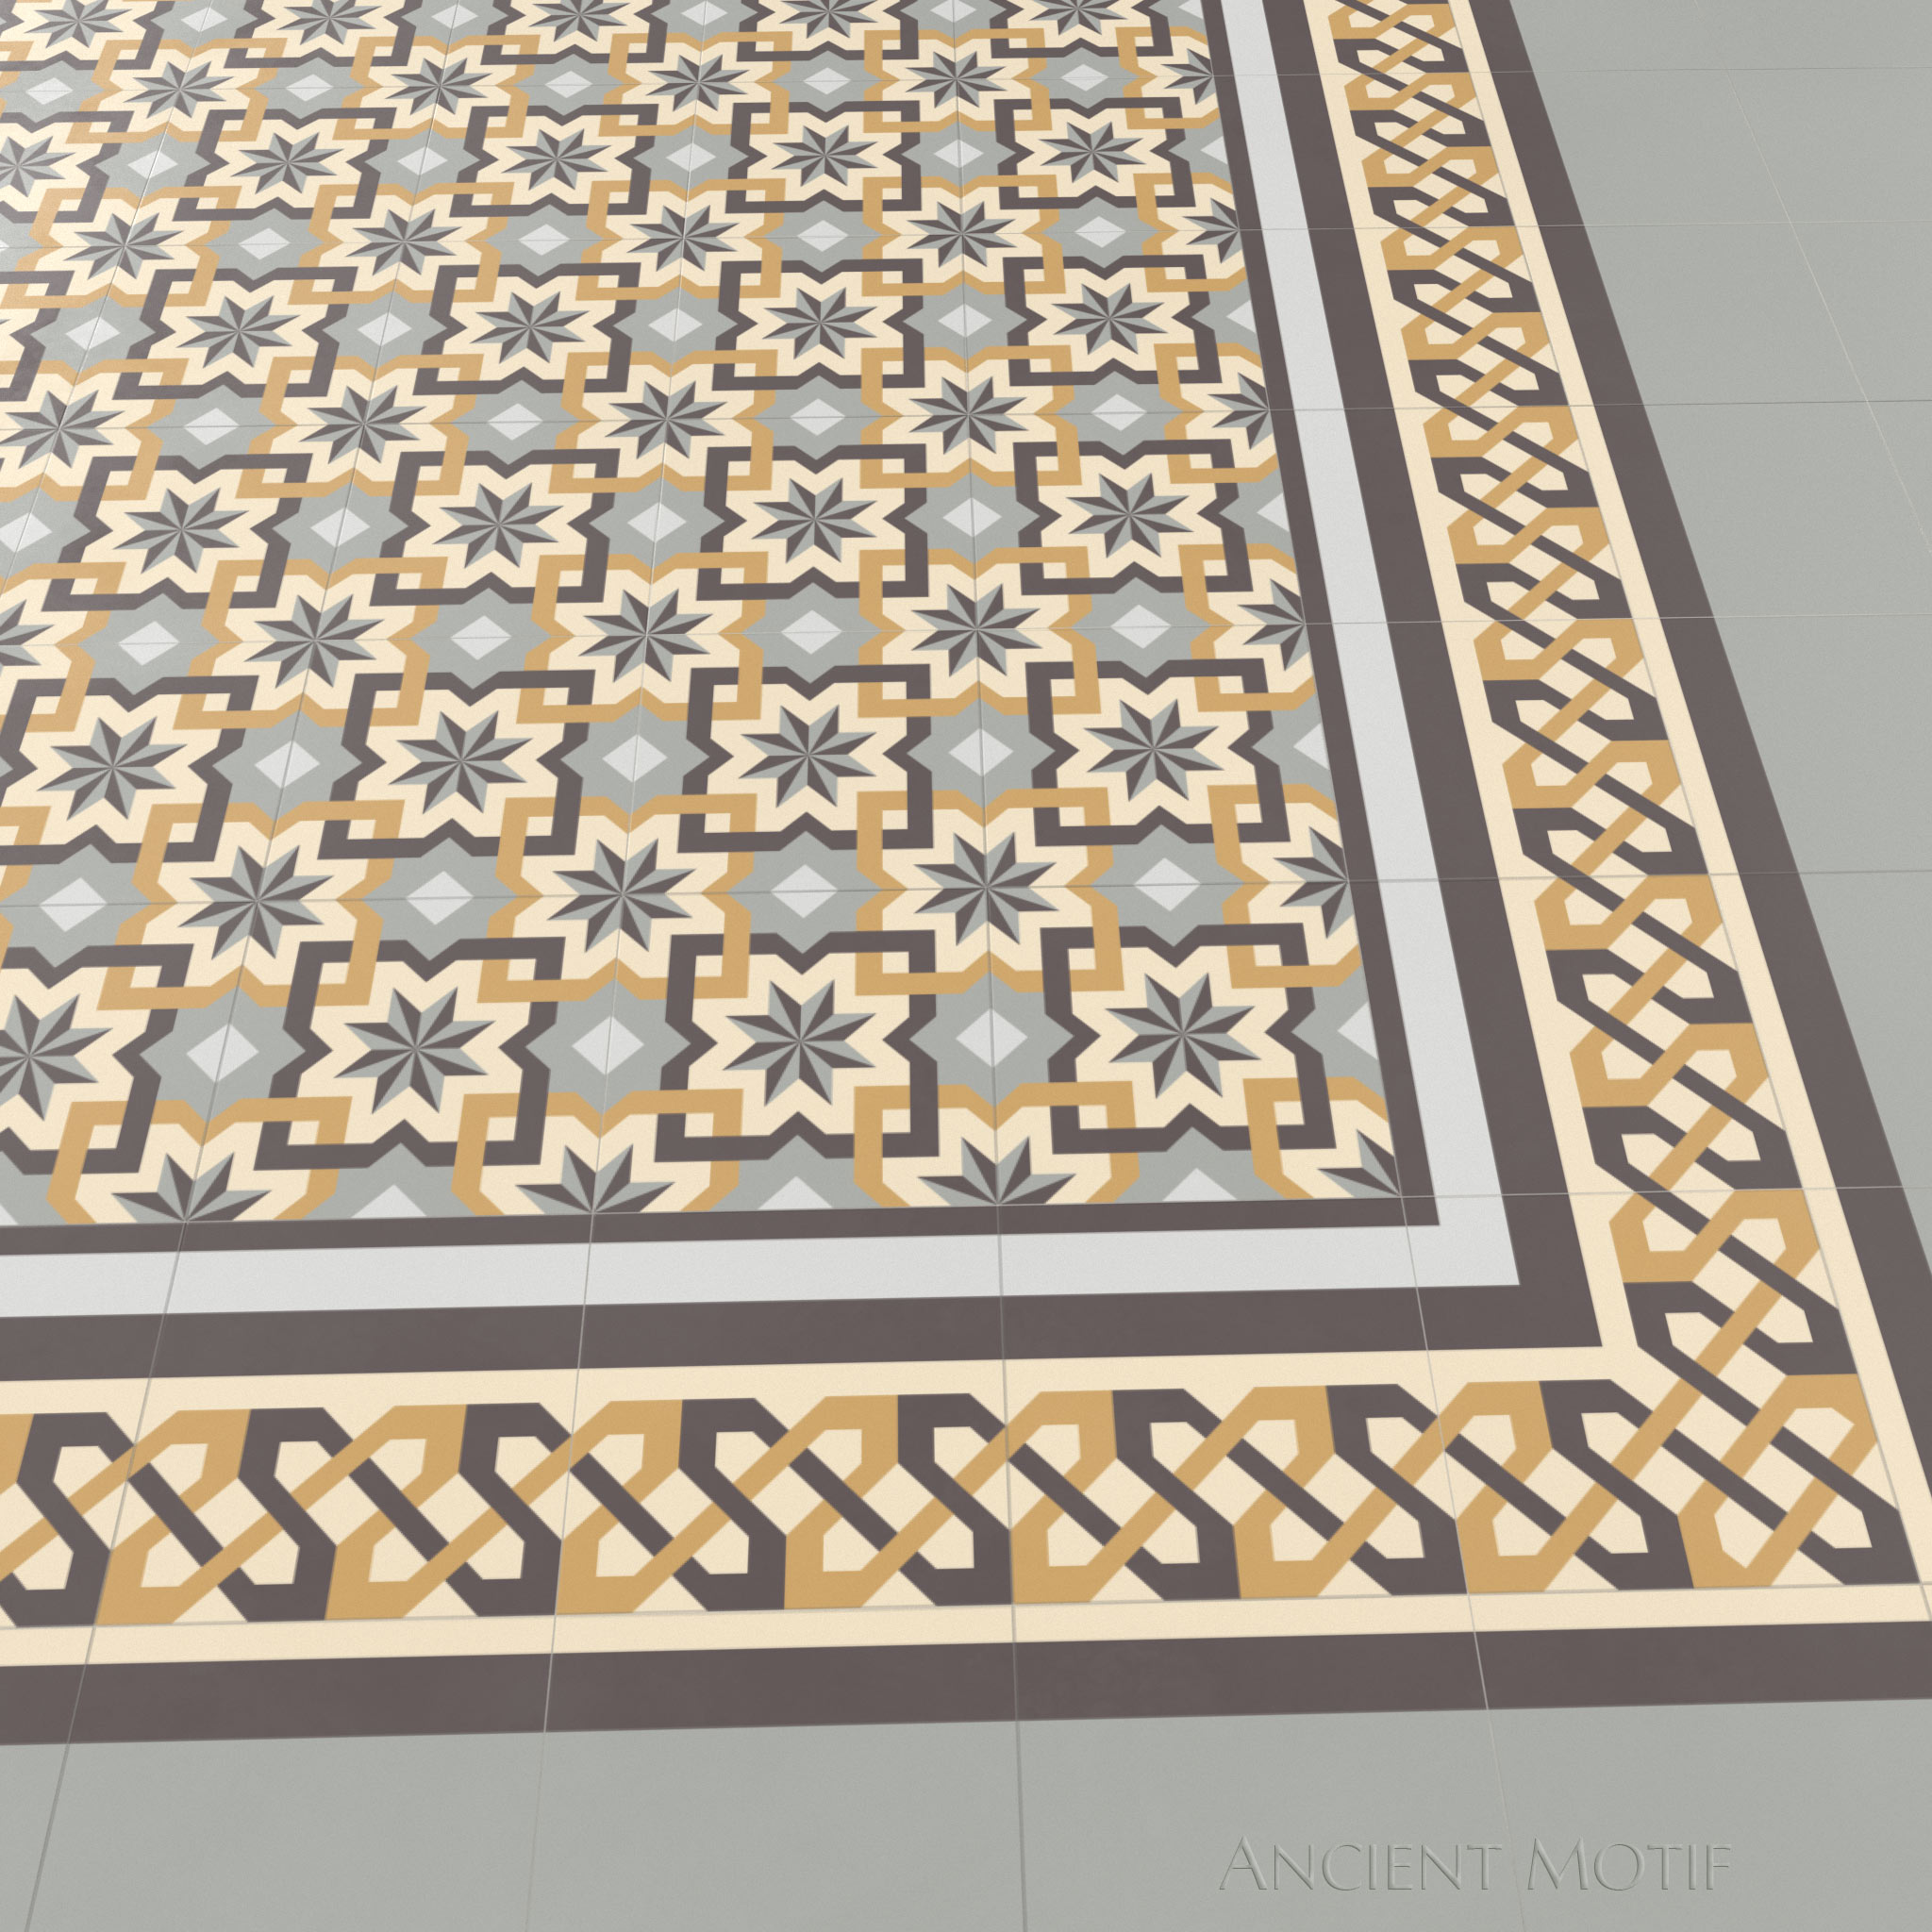 Seville Encaustic Cement Tile Floor in Slate, Latte and Cocoa